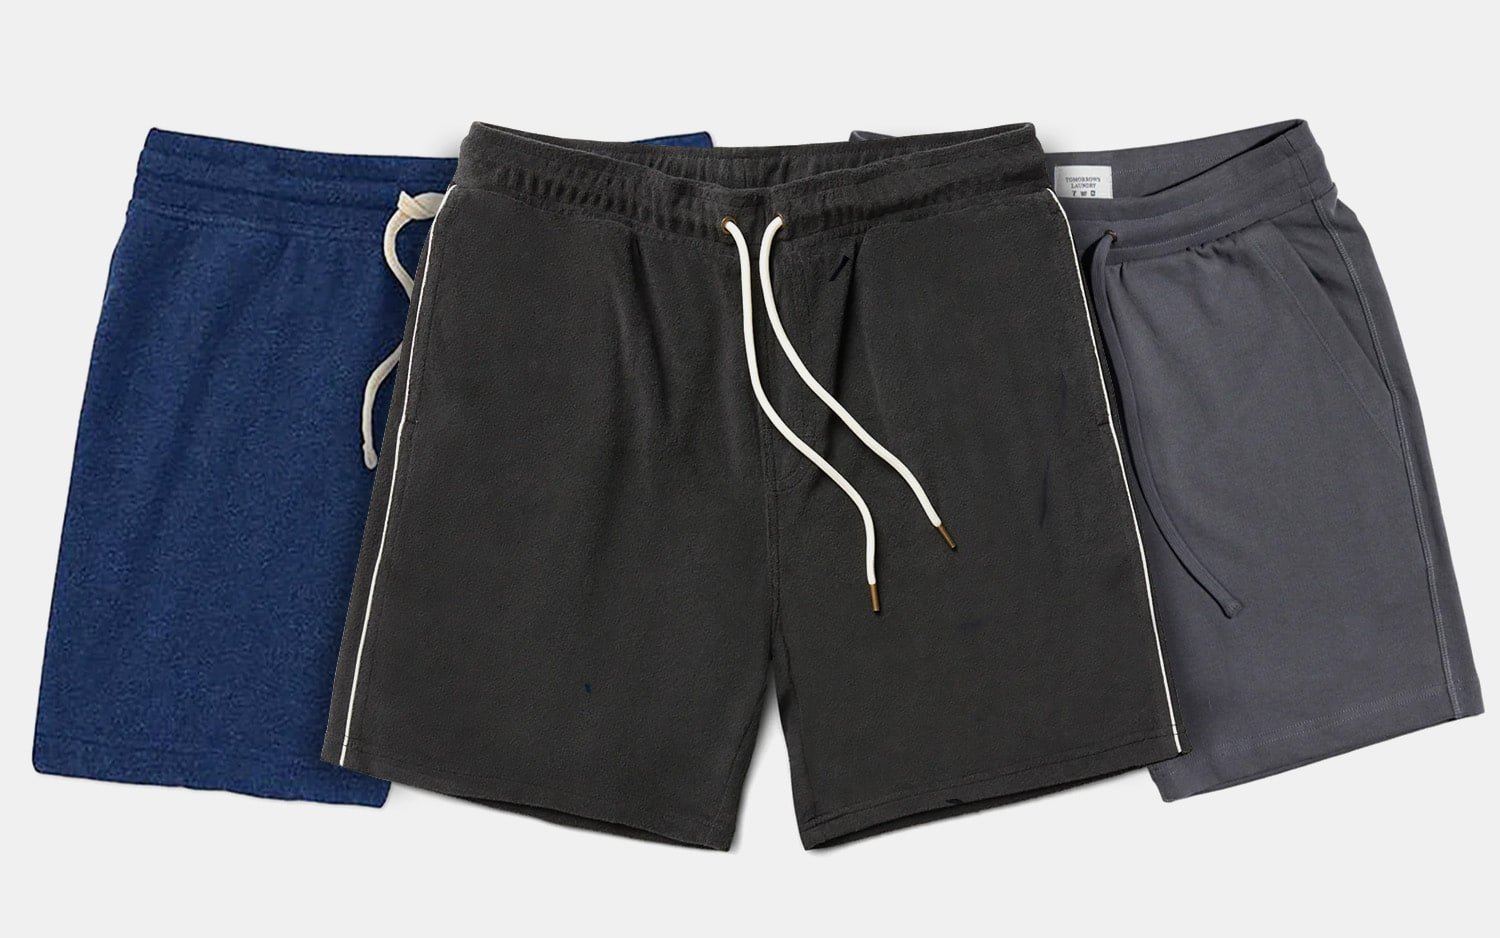 Best Men's Terry Shorts For All-Day Comfort